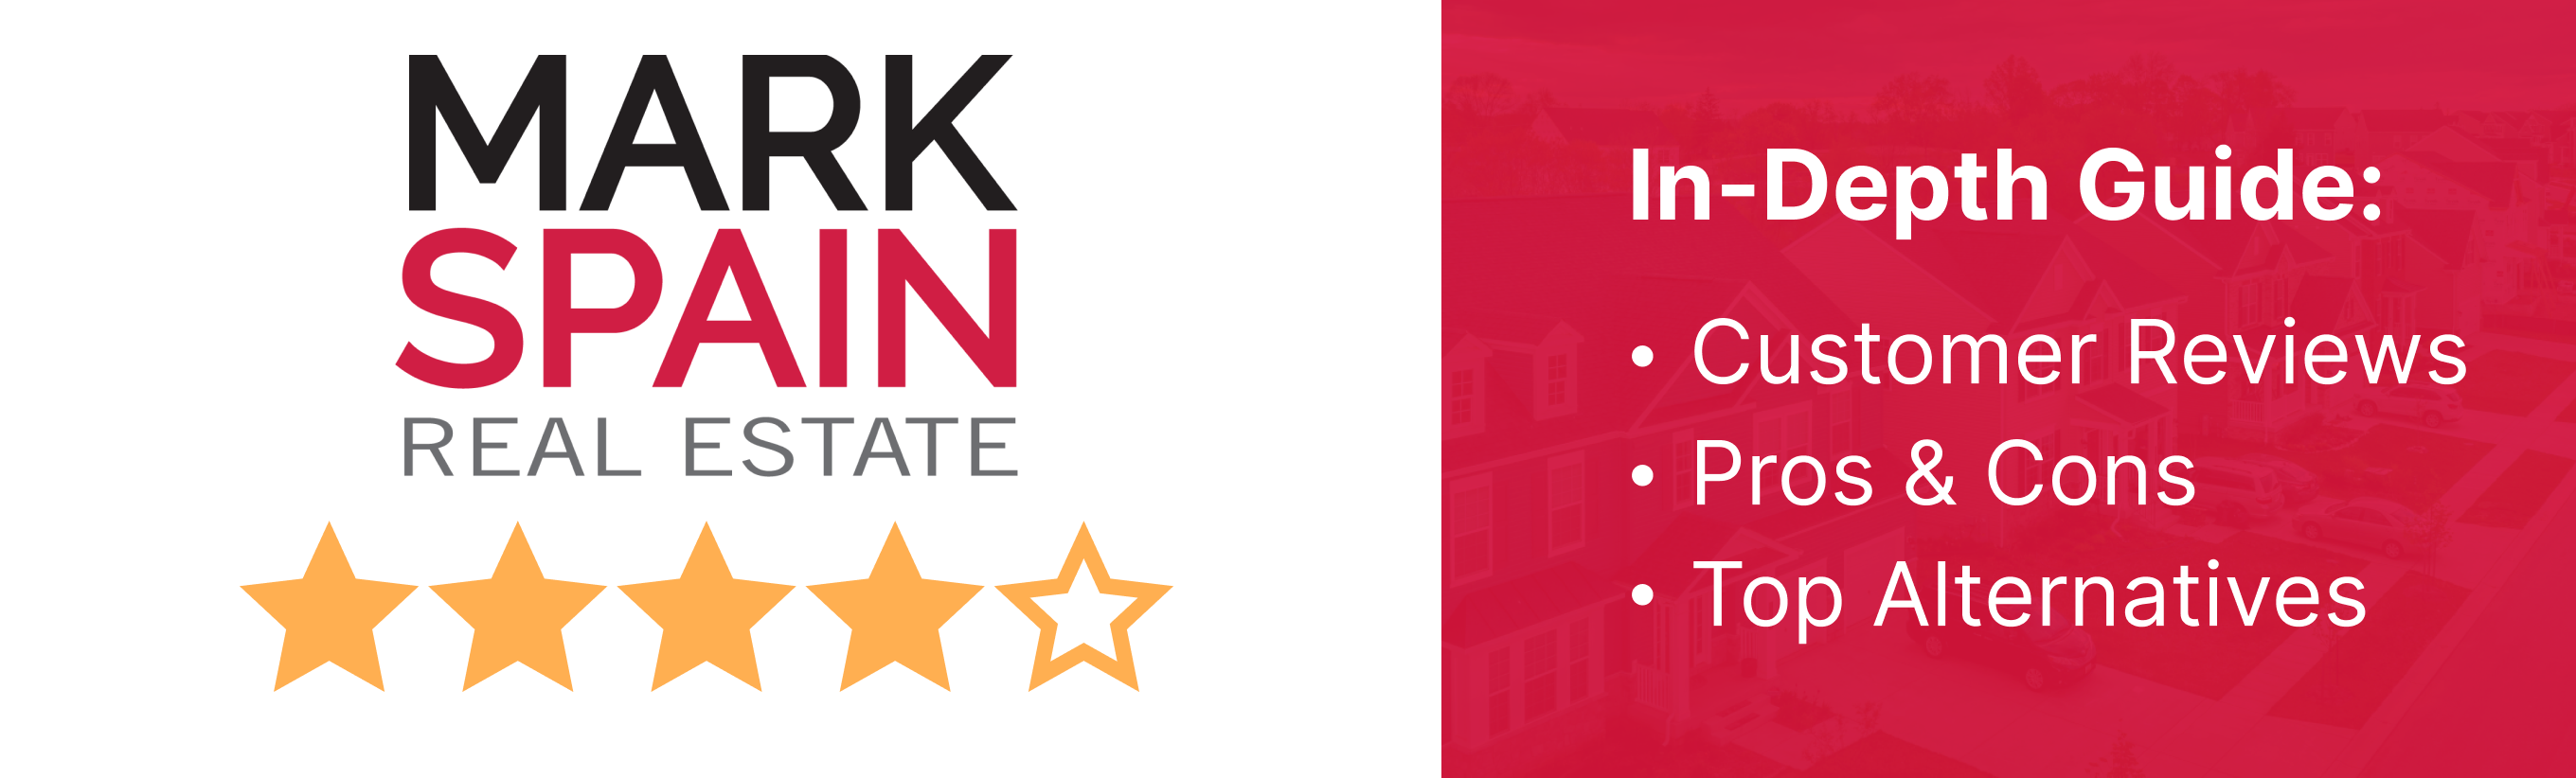 Four-star review of Mark Spain Real Estate.